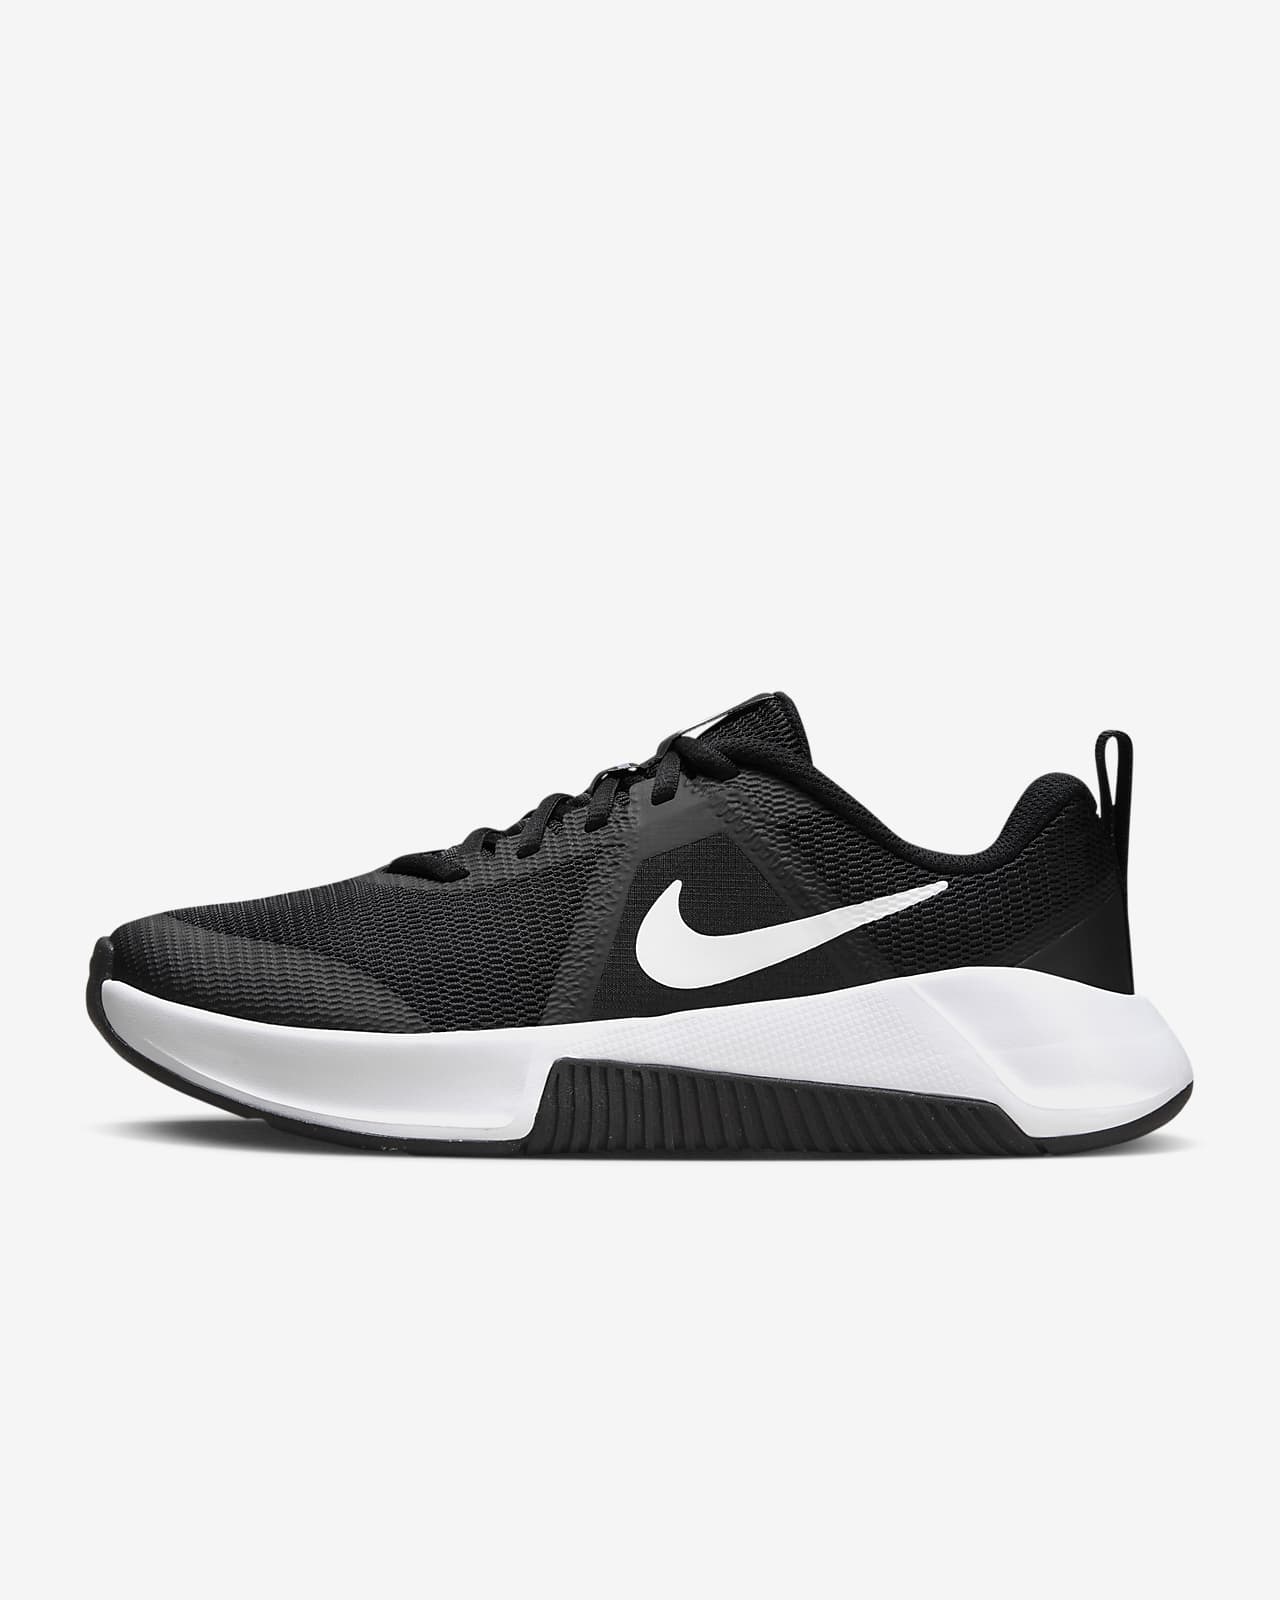 Nike MC Trainer 3 Women's Workout Shoes